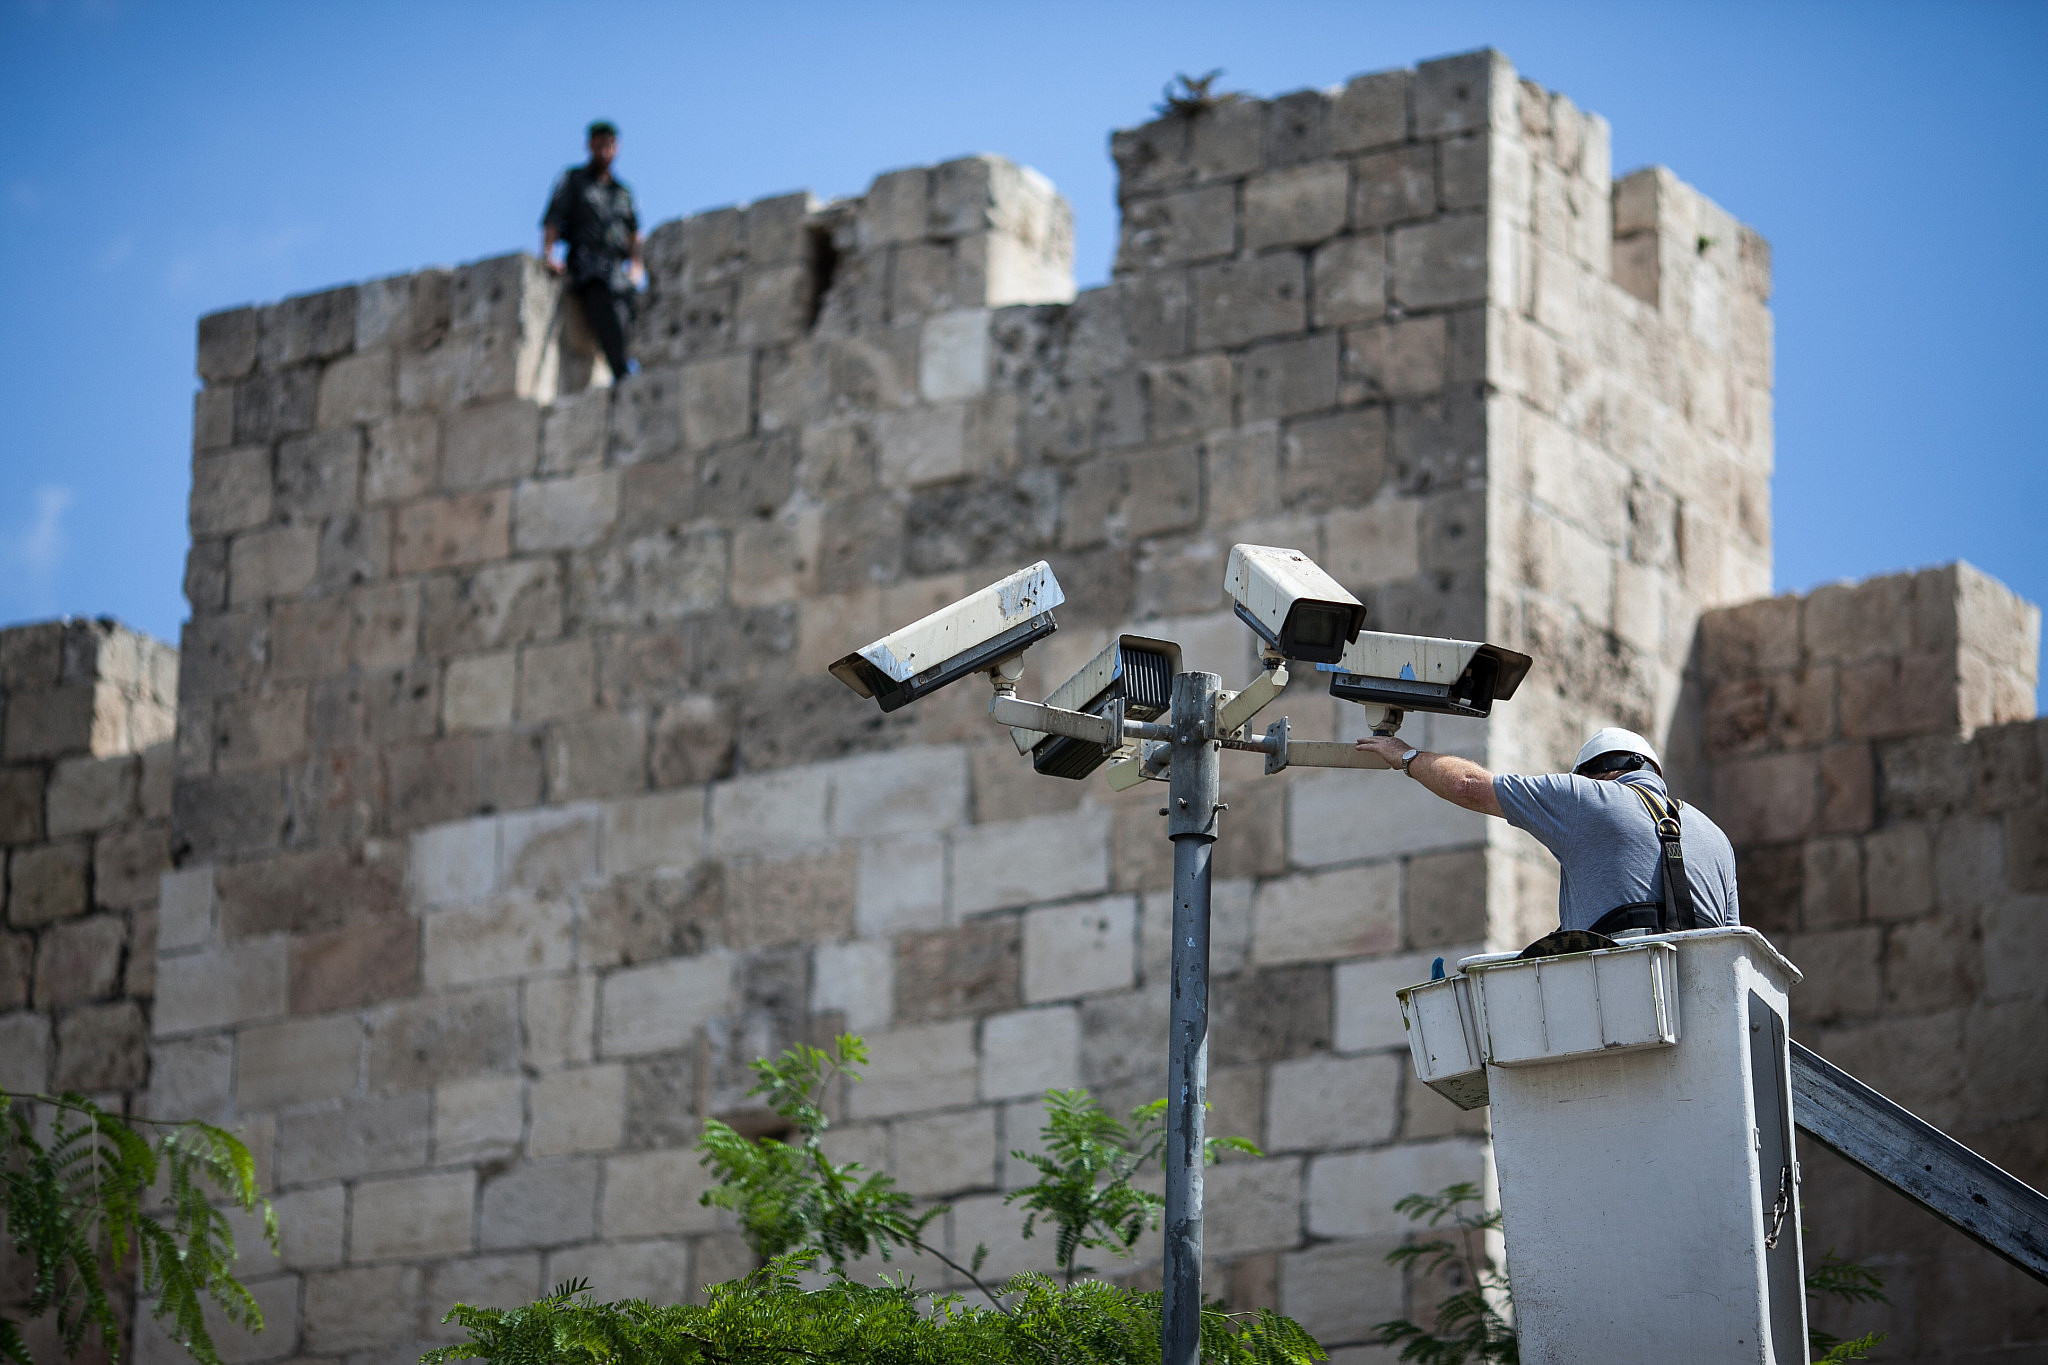 A technician fixes security cameras located near the Old City of Jerusalem, May 20 2012. (Noam Moskowitz/Flash90)